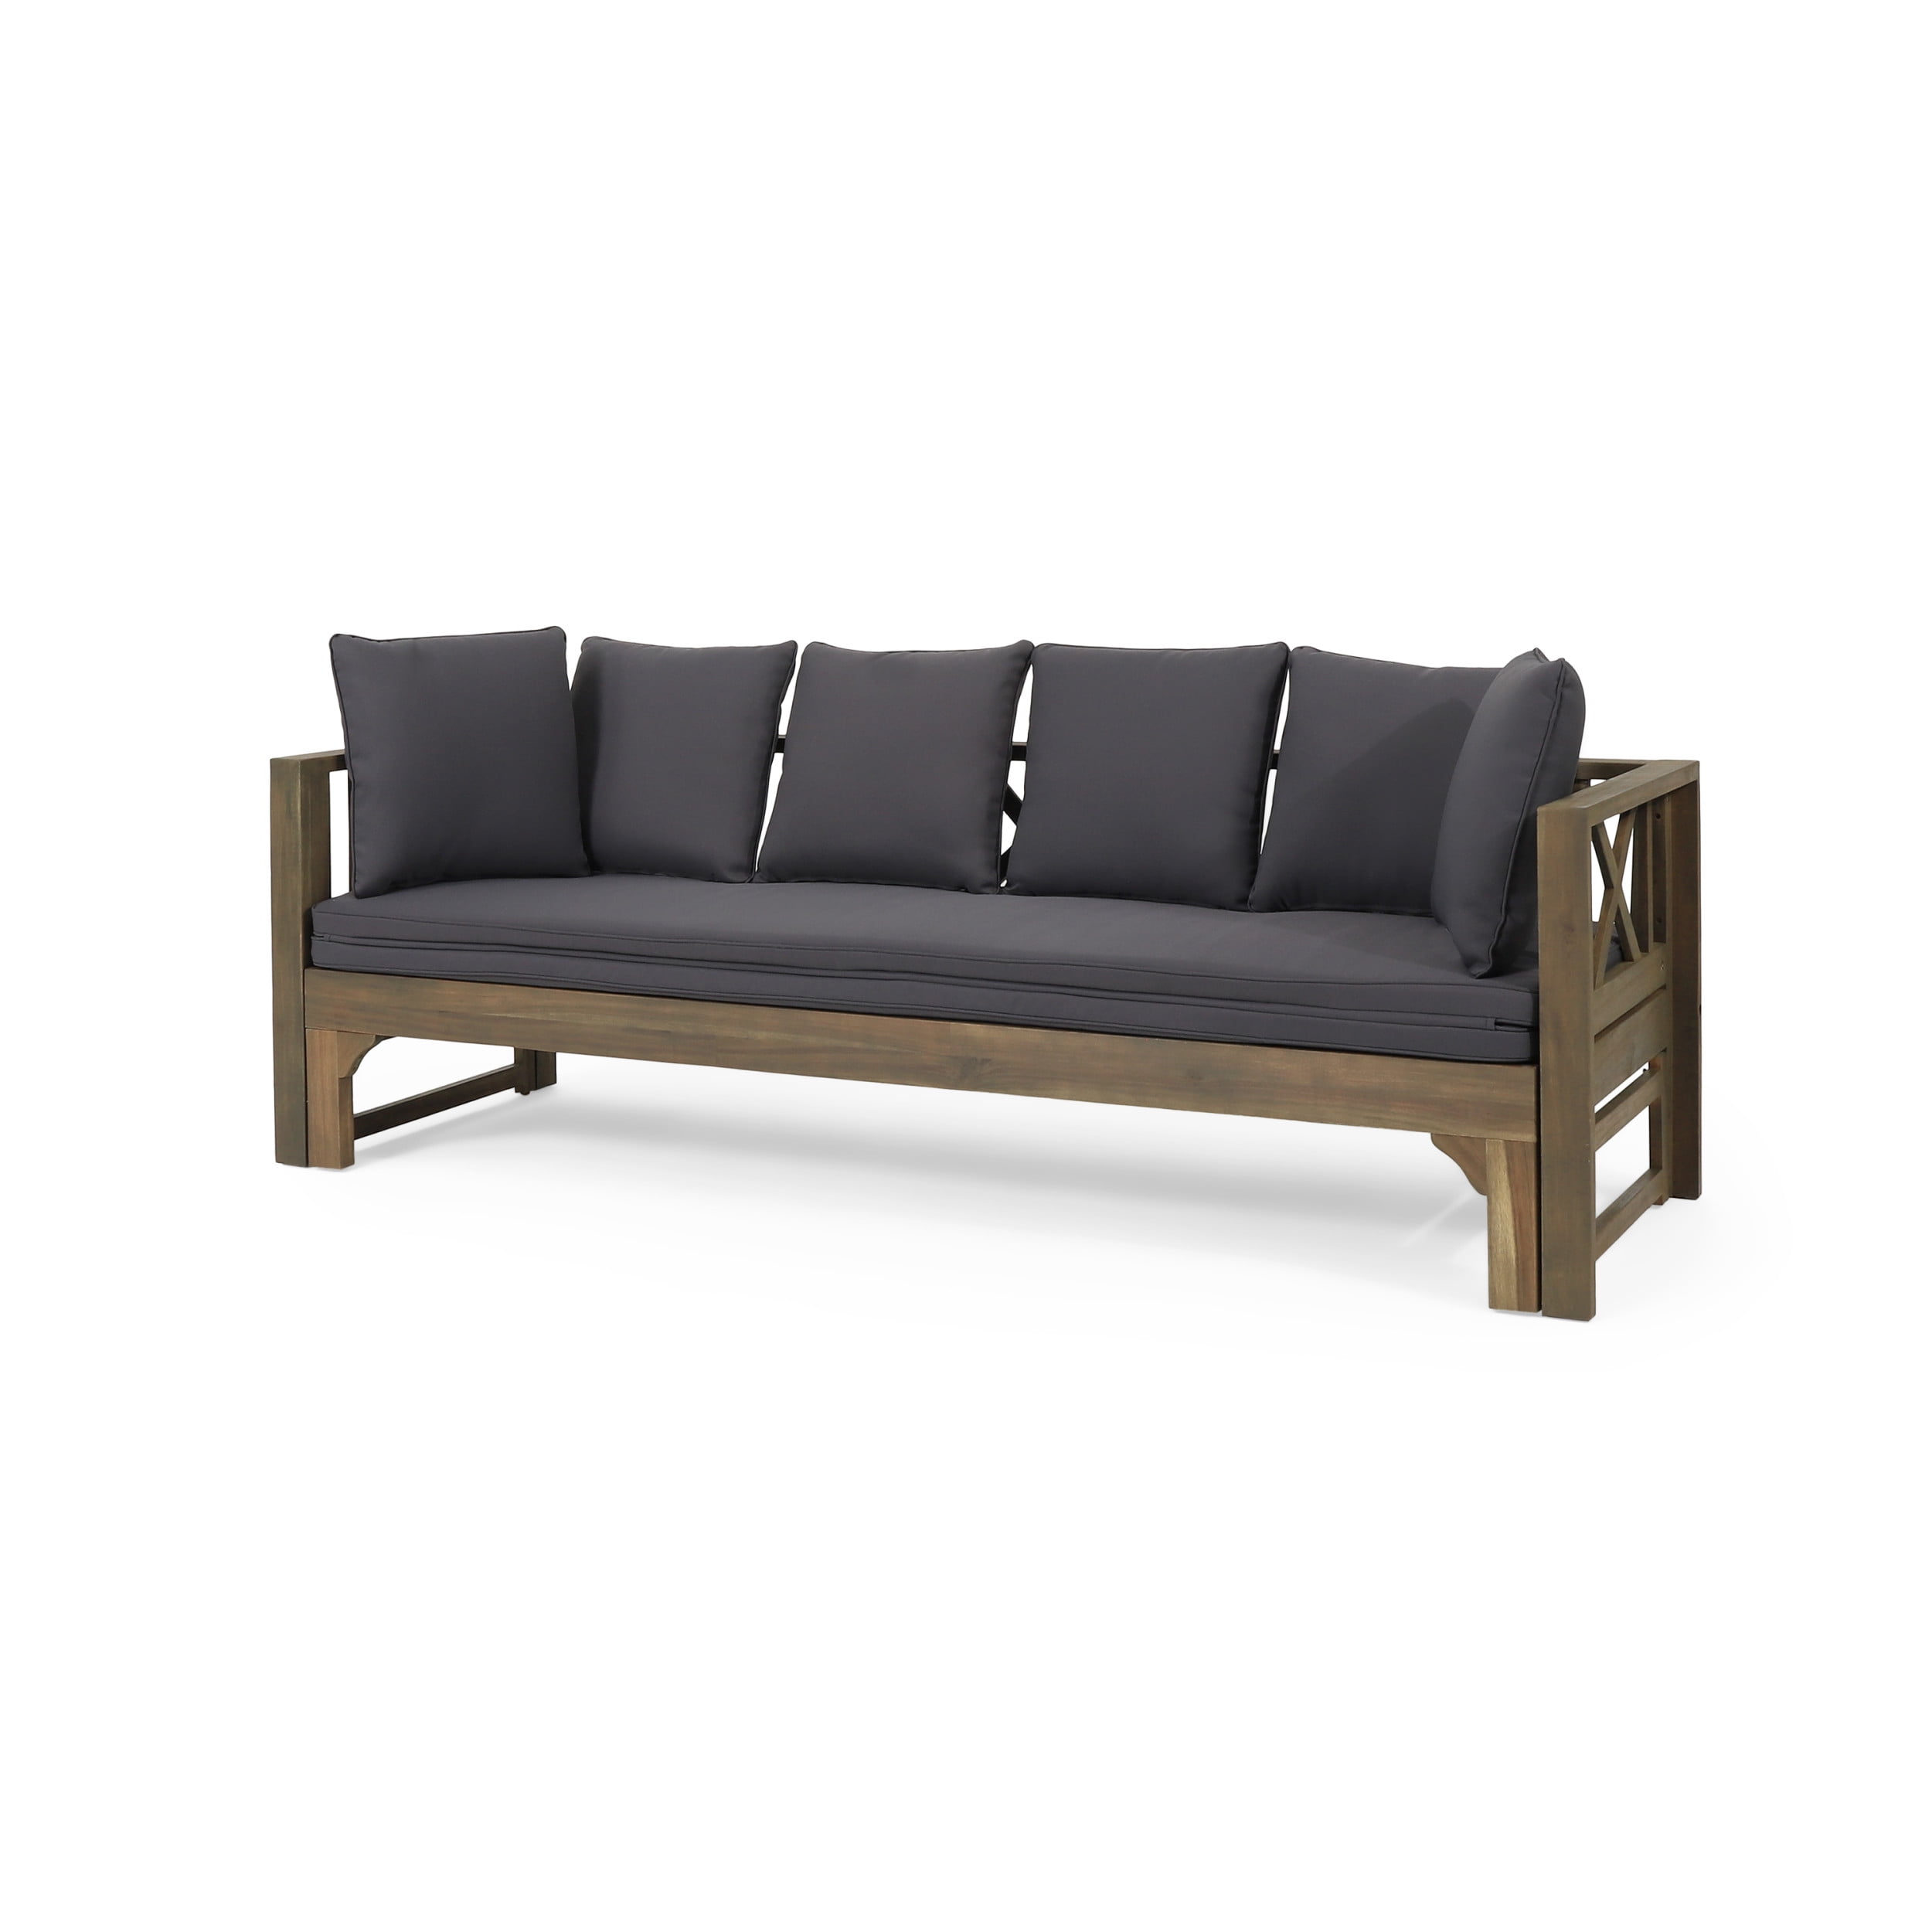 GDF Studio Camille Outdoor Extendable Acacia Wood Daybed Sofa, Teak and  Dark Teal